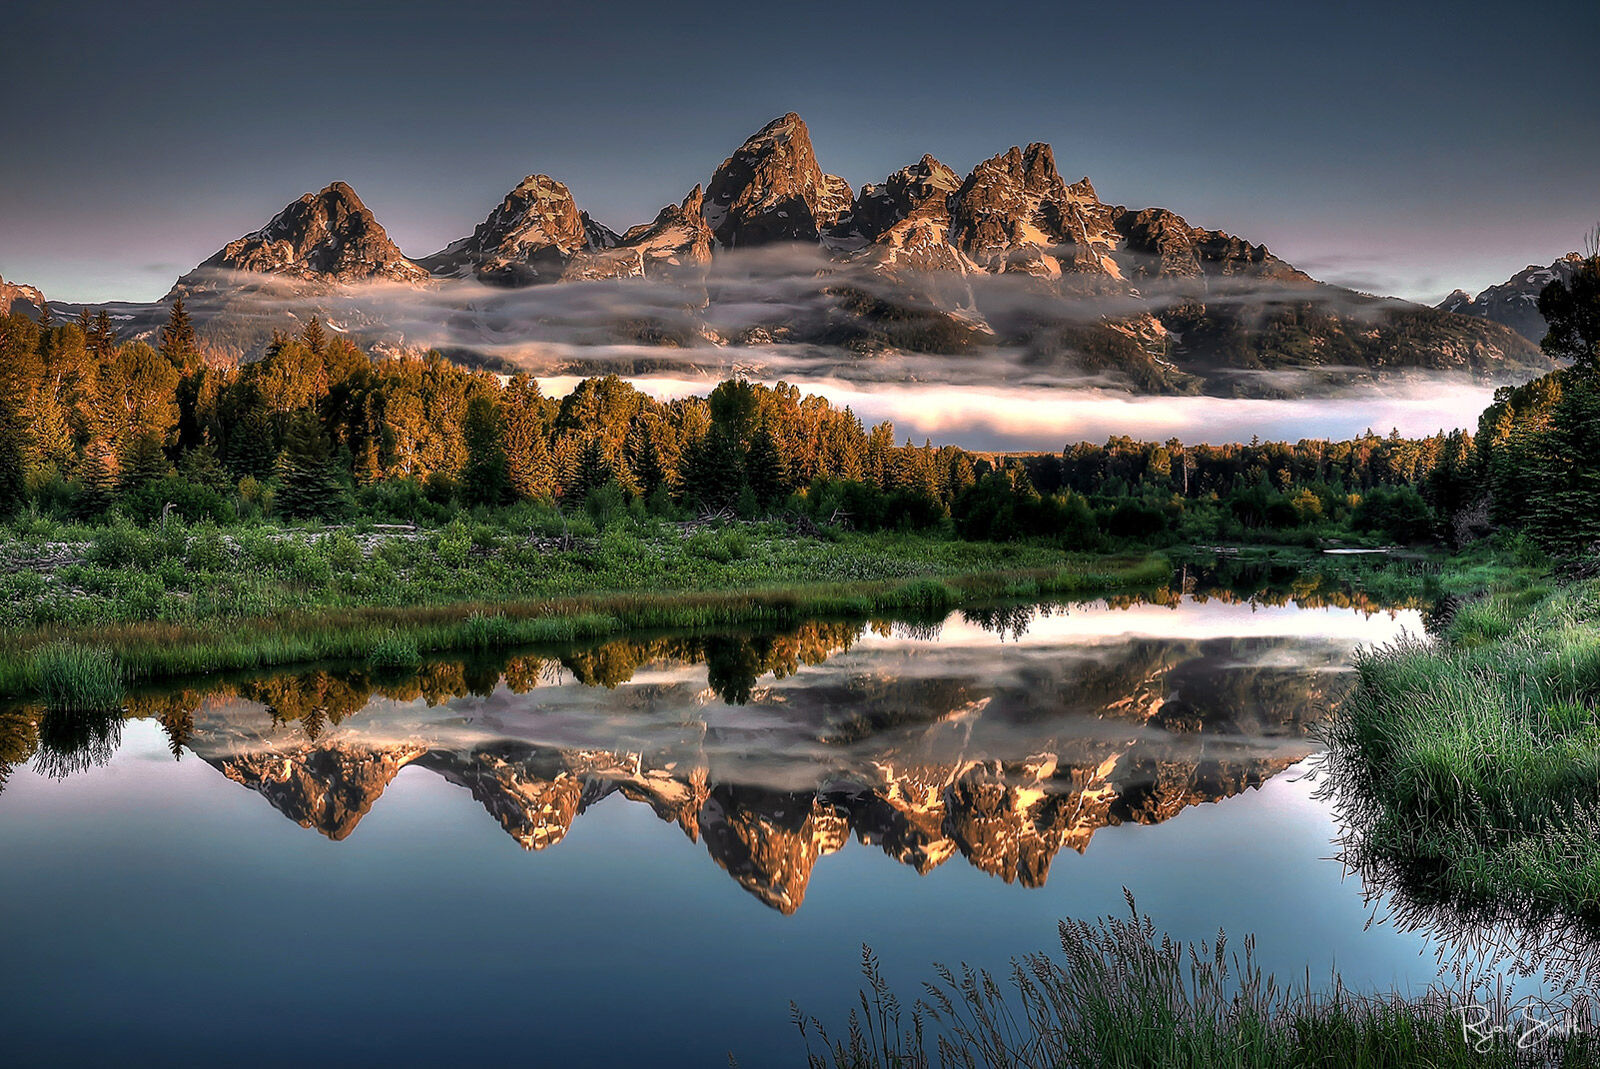 Mountain skyline is seen at sunrise with thin clouds in below Teton peaks. A lake reflects the mountains, clouds & trees that sit in front of the mountain